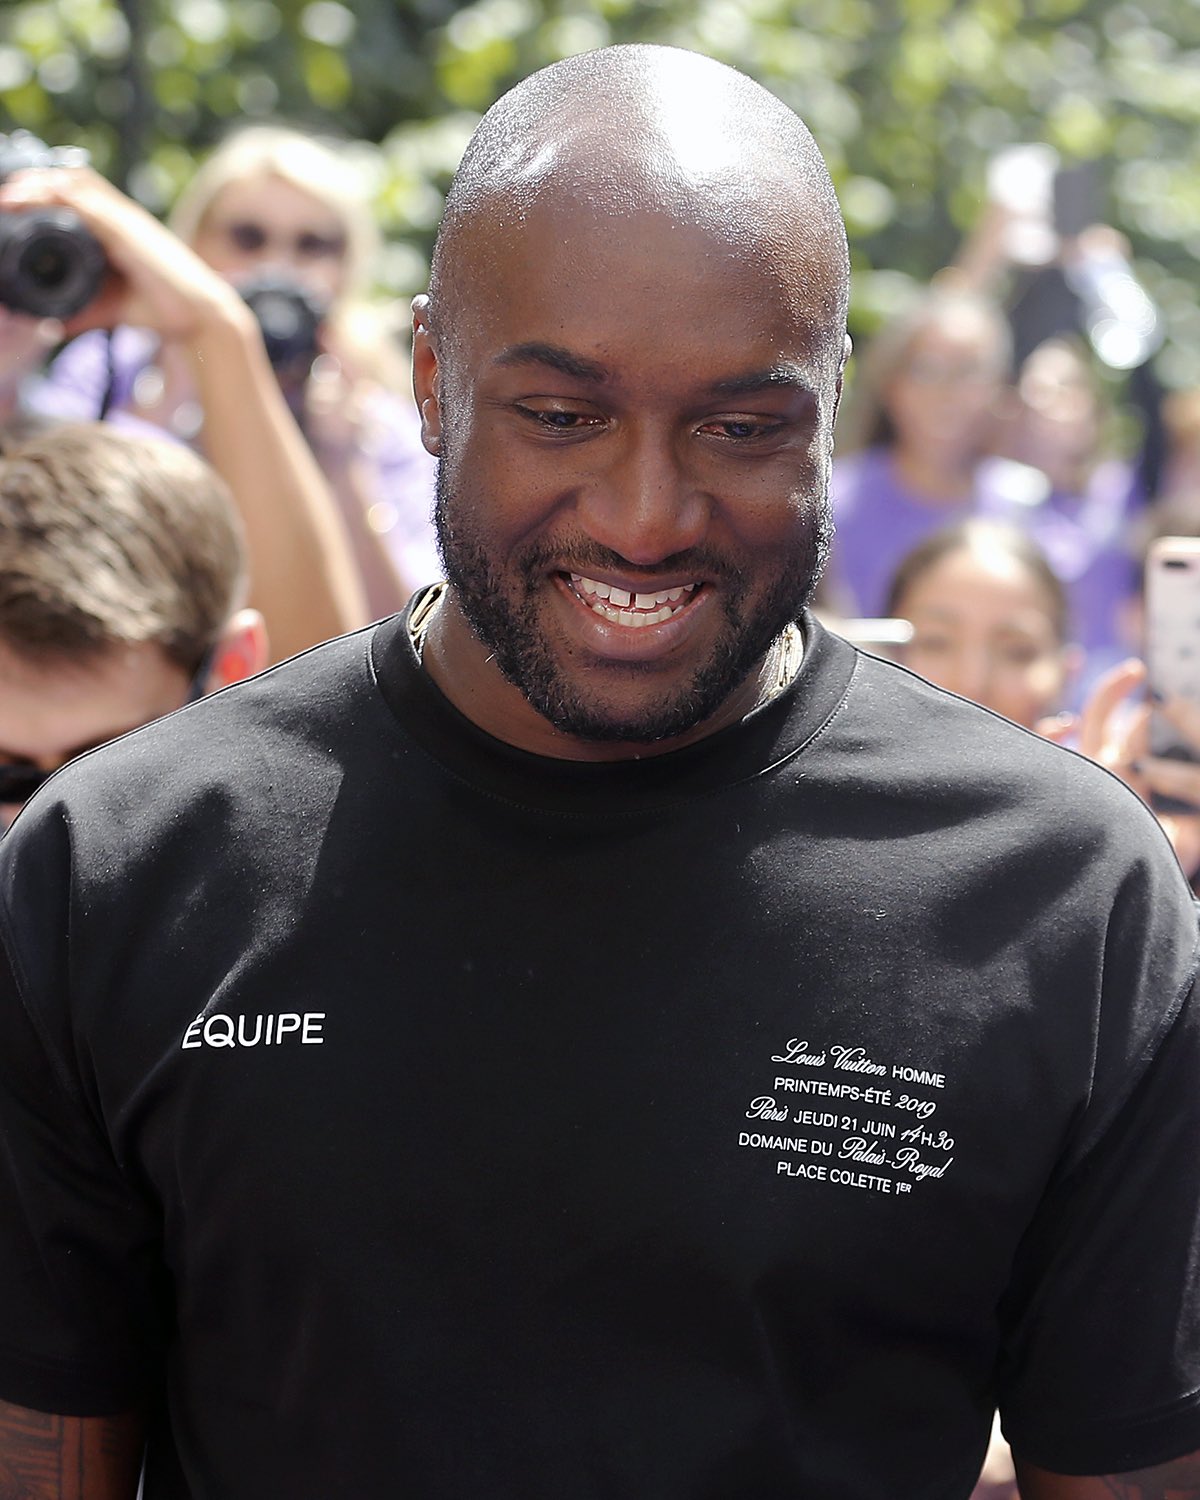 VERSACE on X: The Versace team would like to extend our deepest  condolences at the sad news of Virgil Abloh's passing. A visionary within  the world of fashion, his presence will be